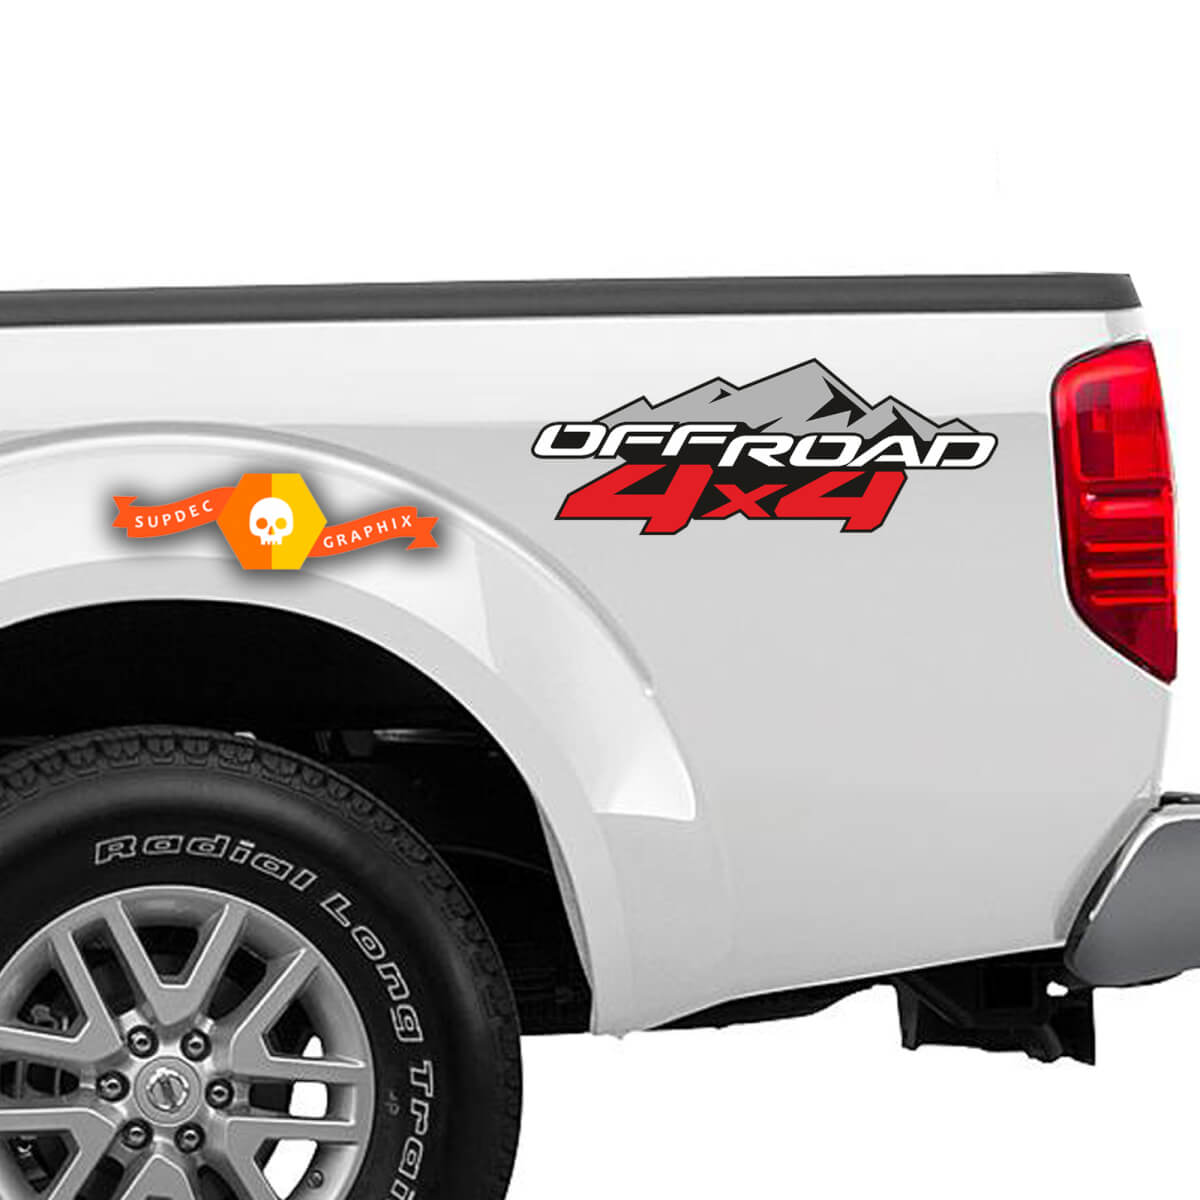 4x4 Off Road Mountains Truck Bed Decal Vinyl Sticker 3